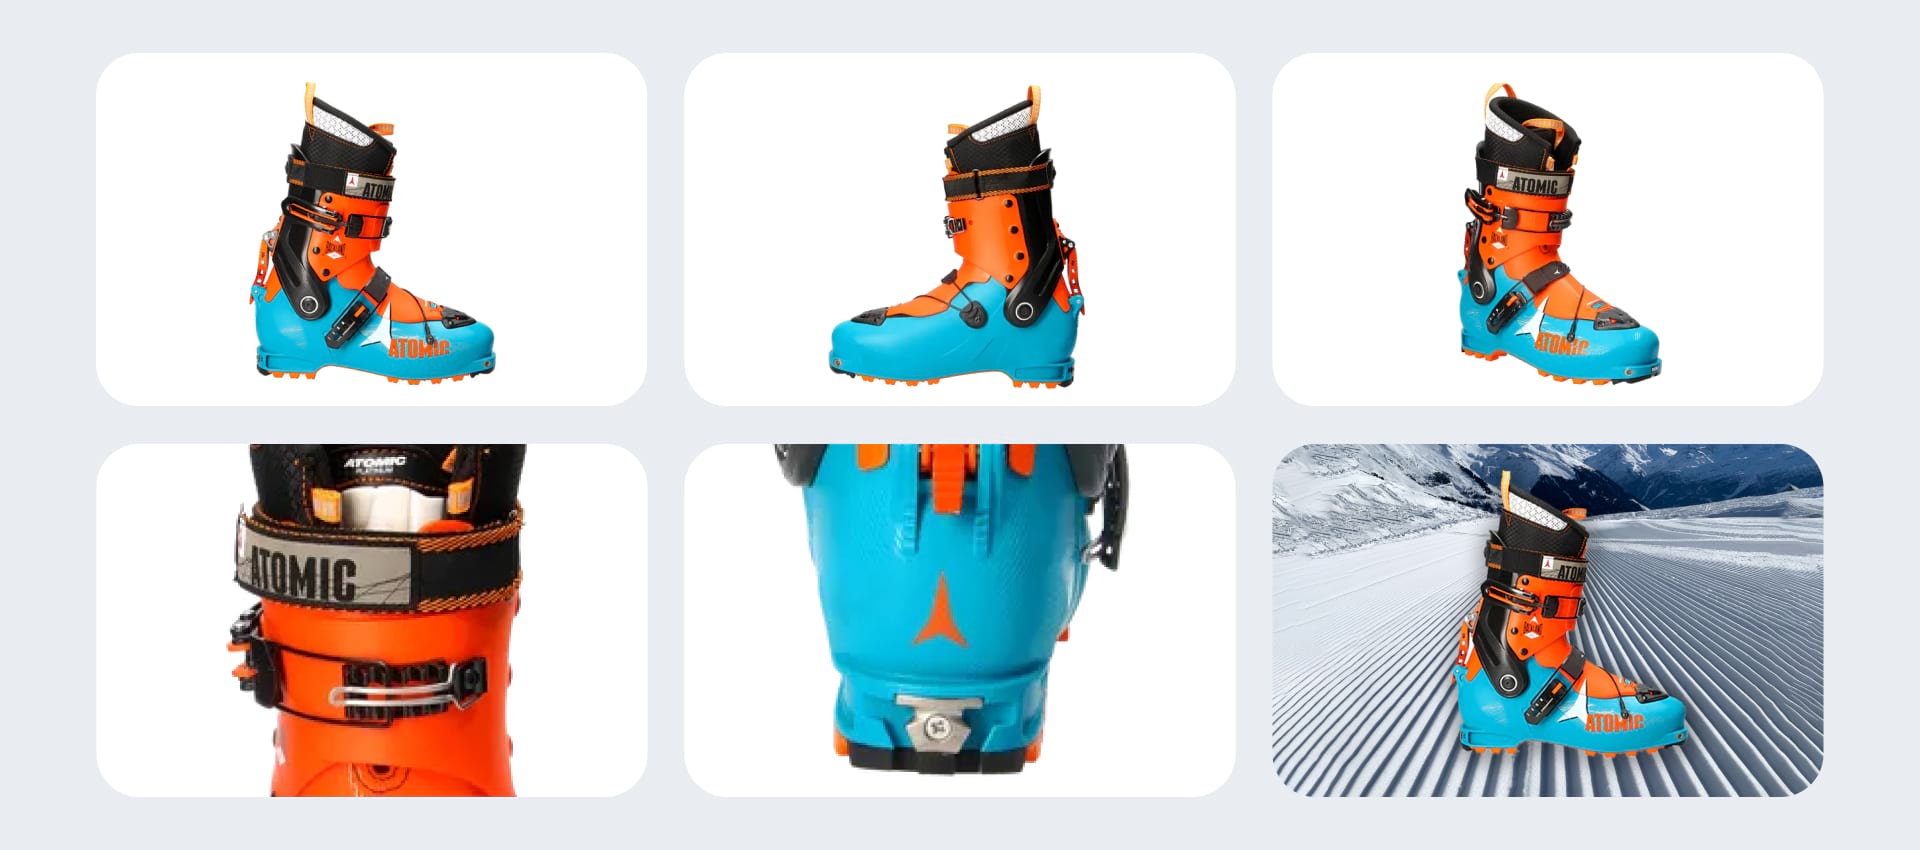  Product storyboard of a snowboot from different angles